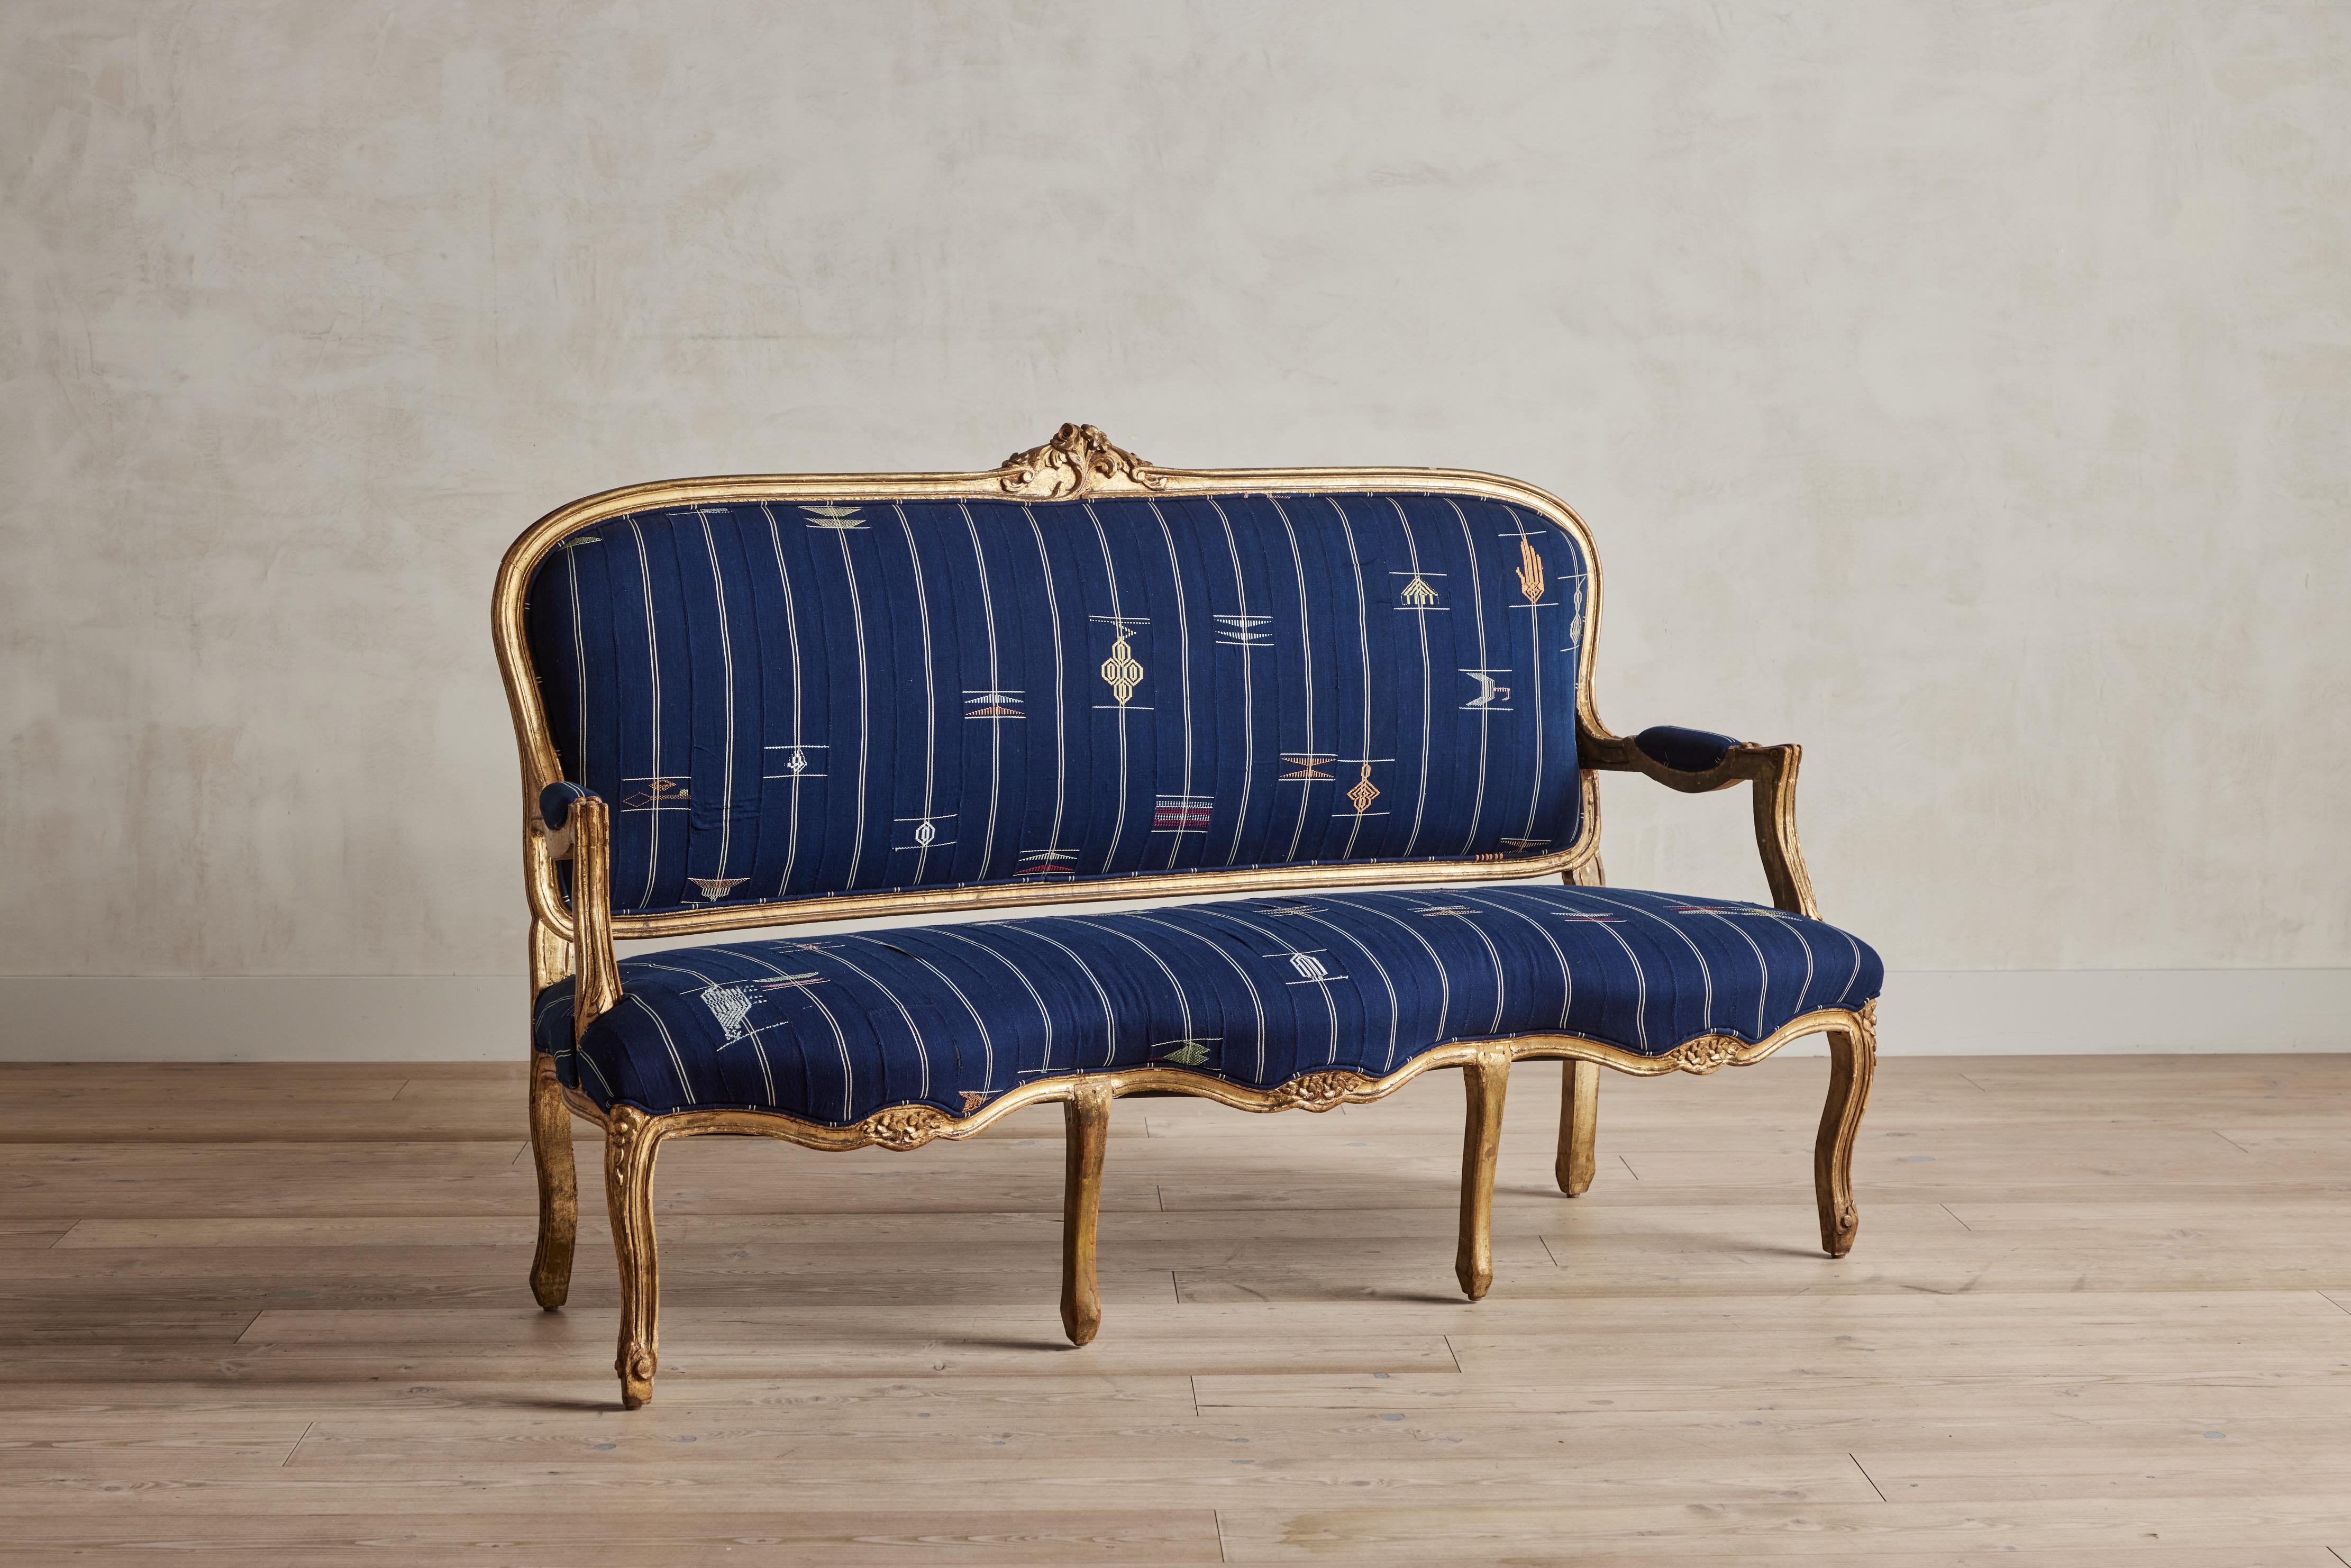 Louis XV settee from France reupholstered in a striking blue vintage Ewe textile from West Africa. Good condition with some wear on giltwood frame that is consistent with age and use.